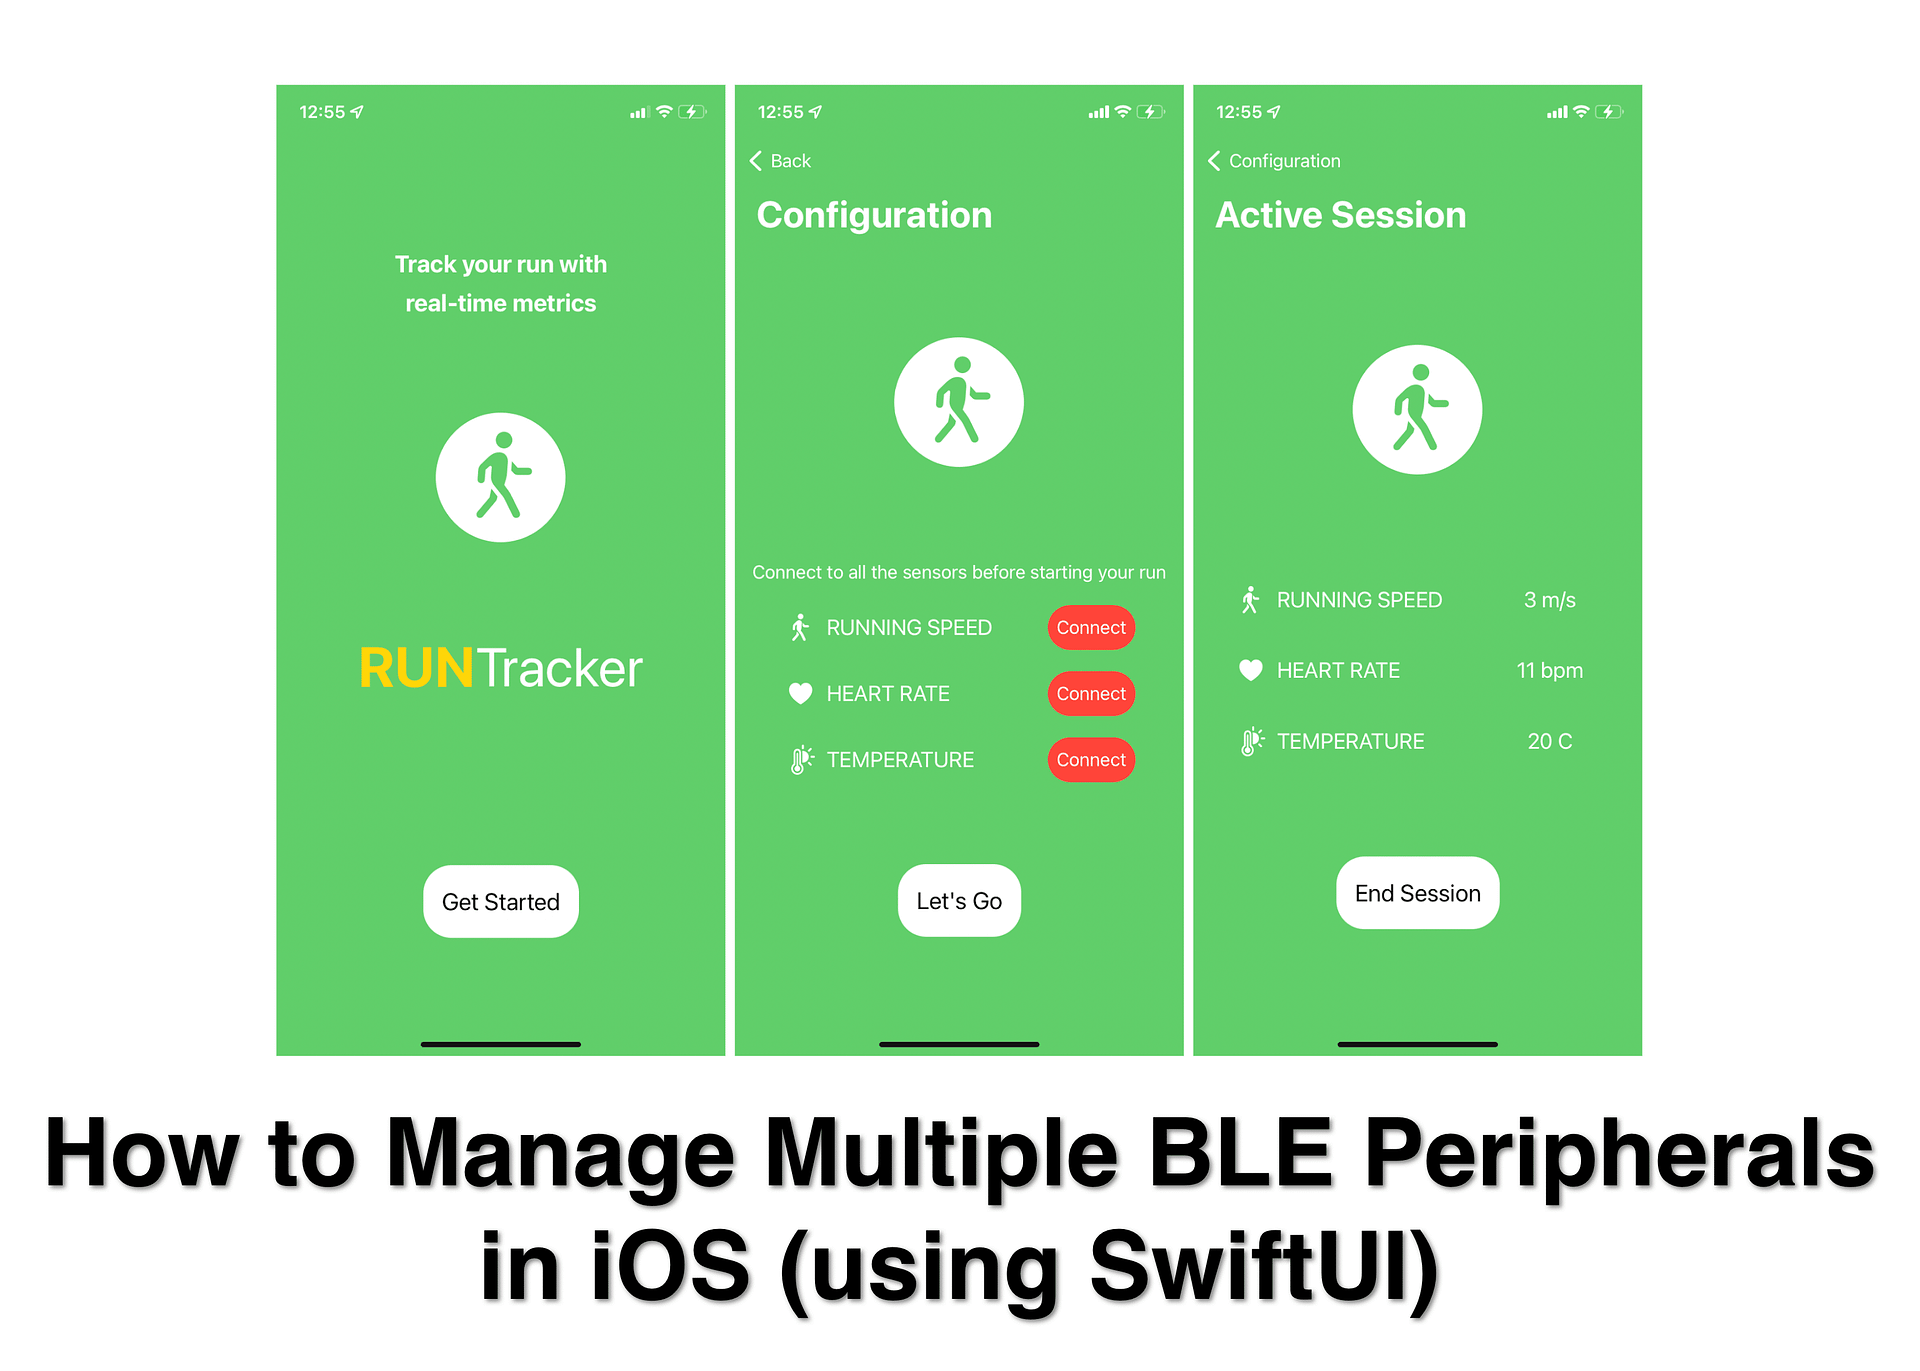 How to Manage Multiple BLE Peripherals in iOS | Novel Bits